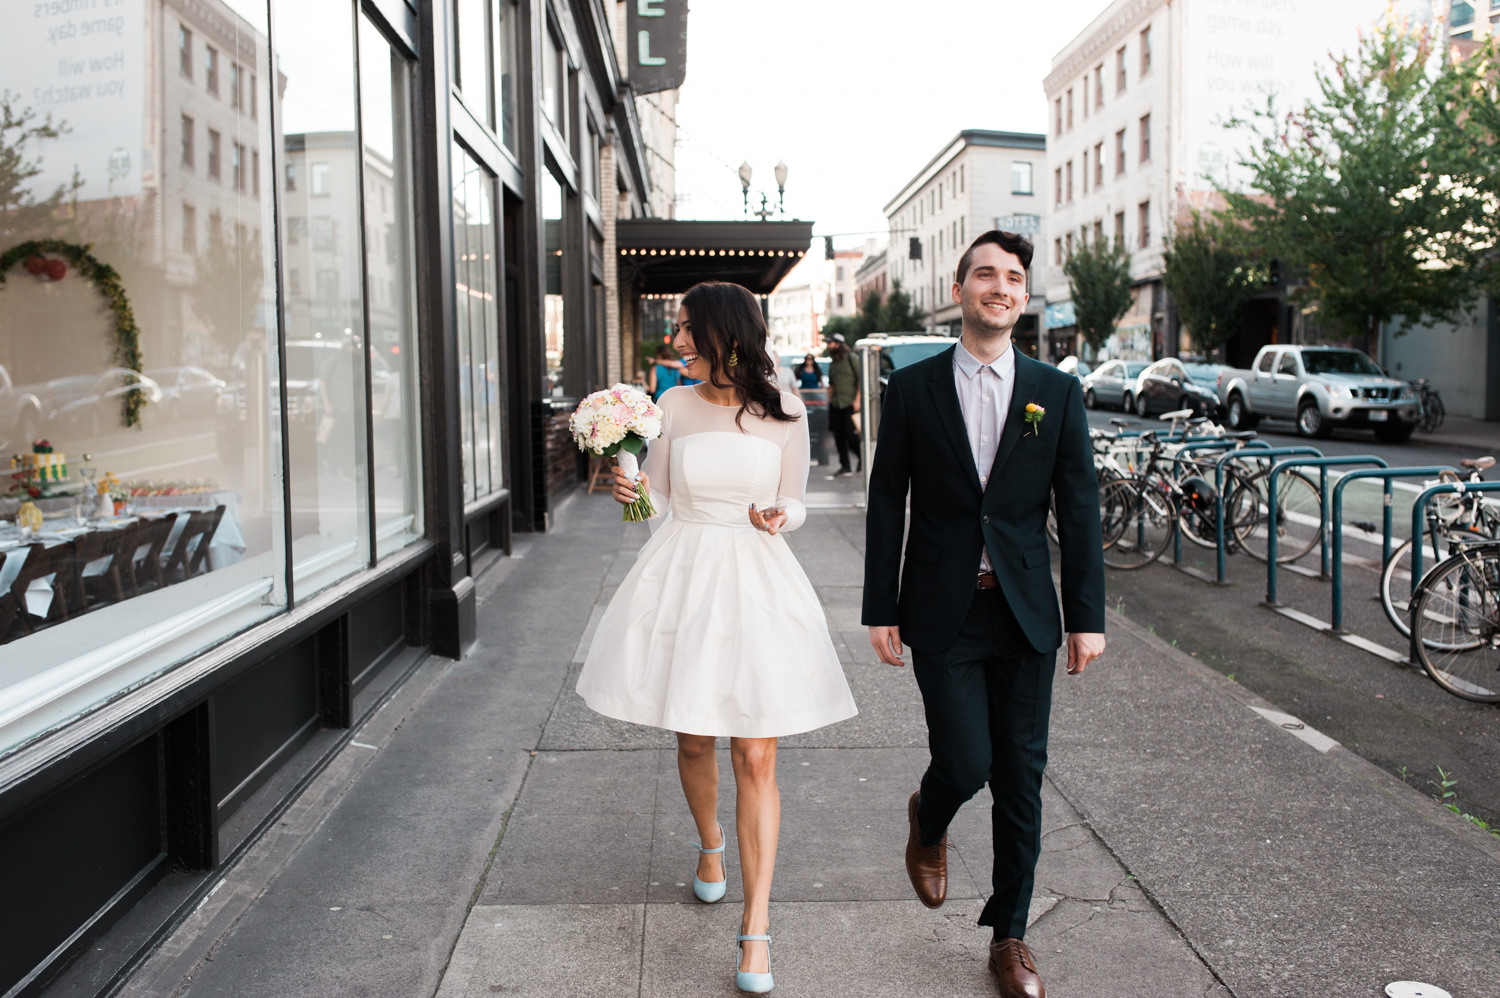 Bride and groom at the Ace Hotel Portland by Ace Hotel wedding photographer Briana Morrison